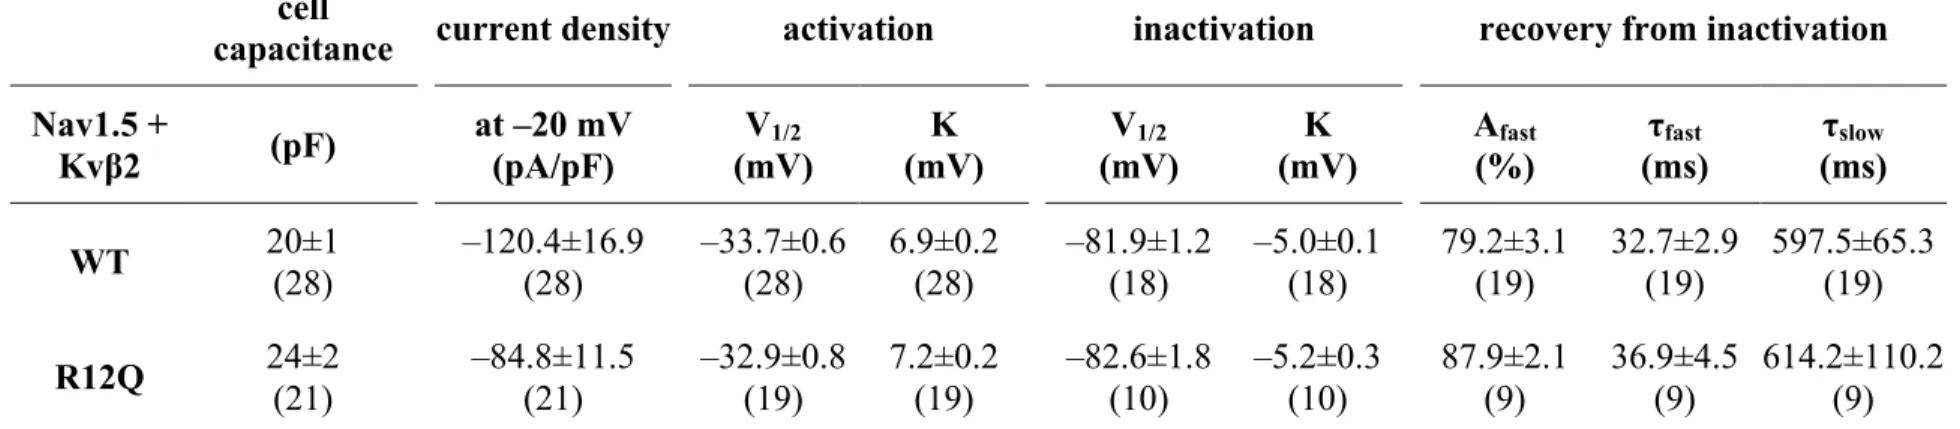 Table S4. Absence of effects of R12Q mutation of Kvβ2 on sodium channel biophysical parameters